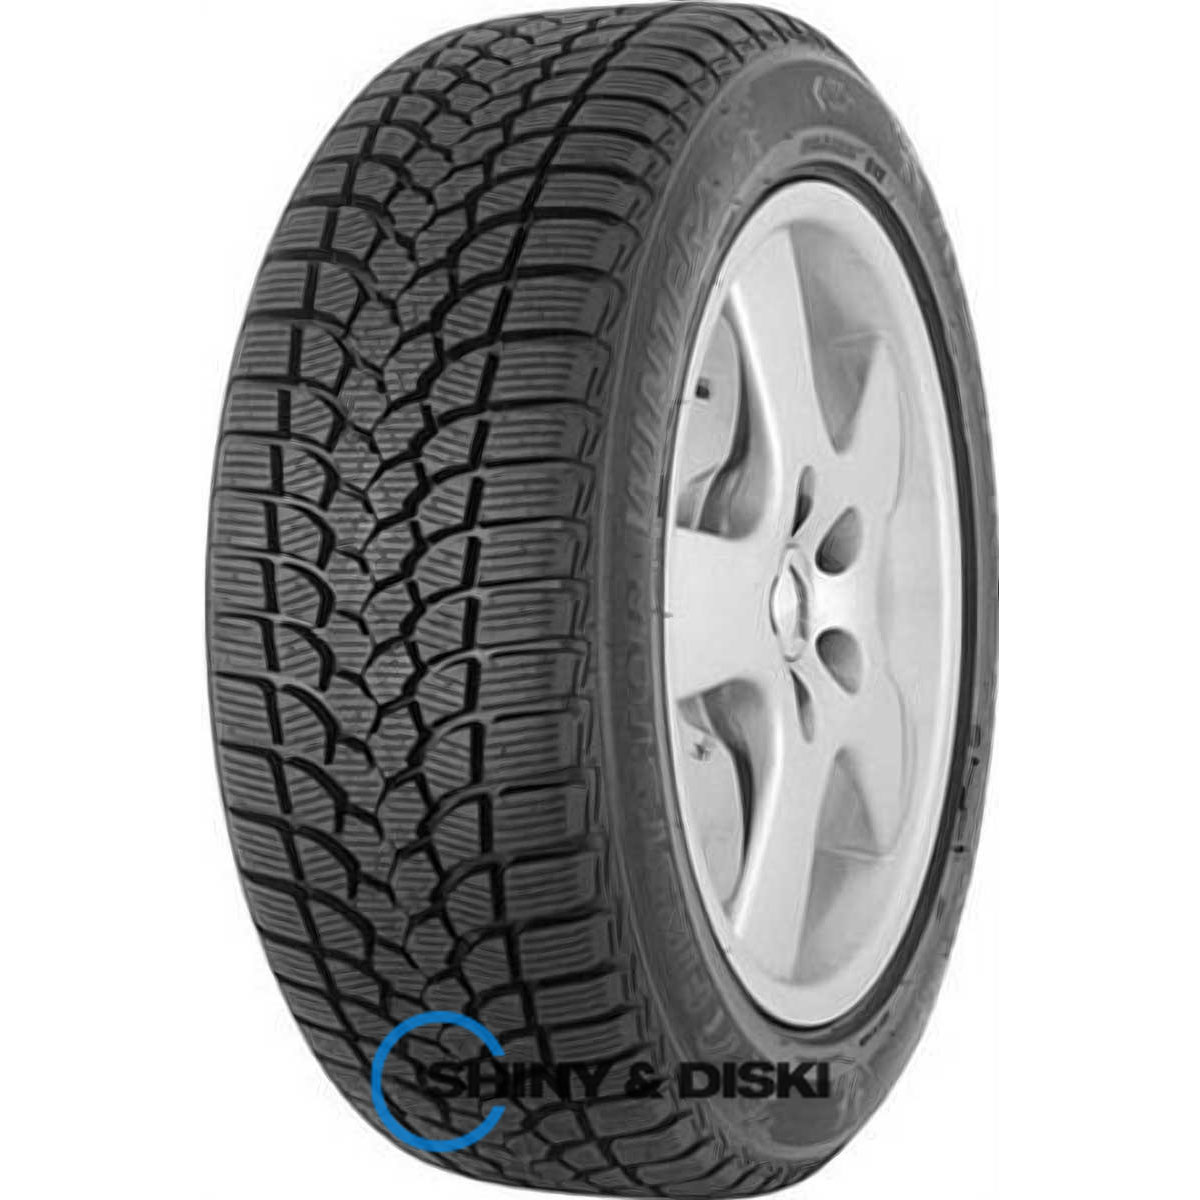 firststop winter 2 145/70 r13 71t